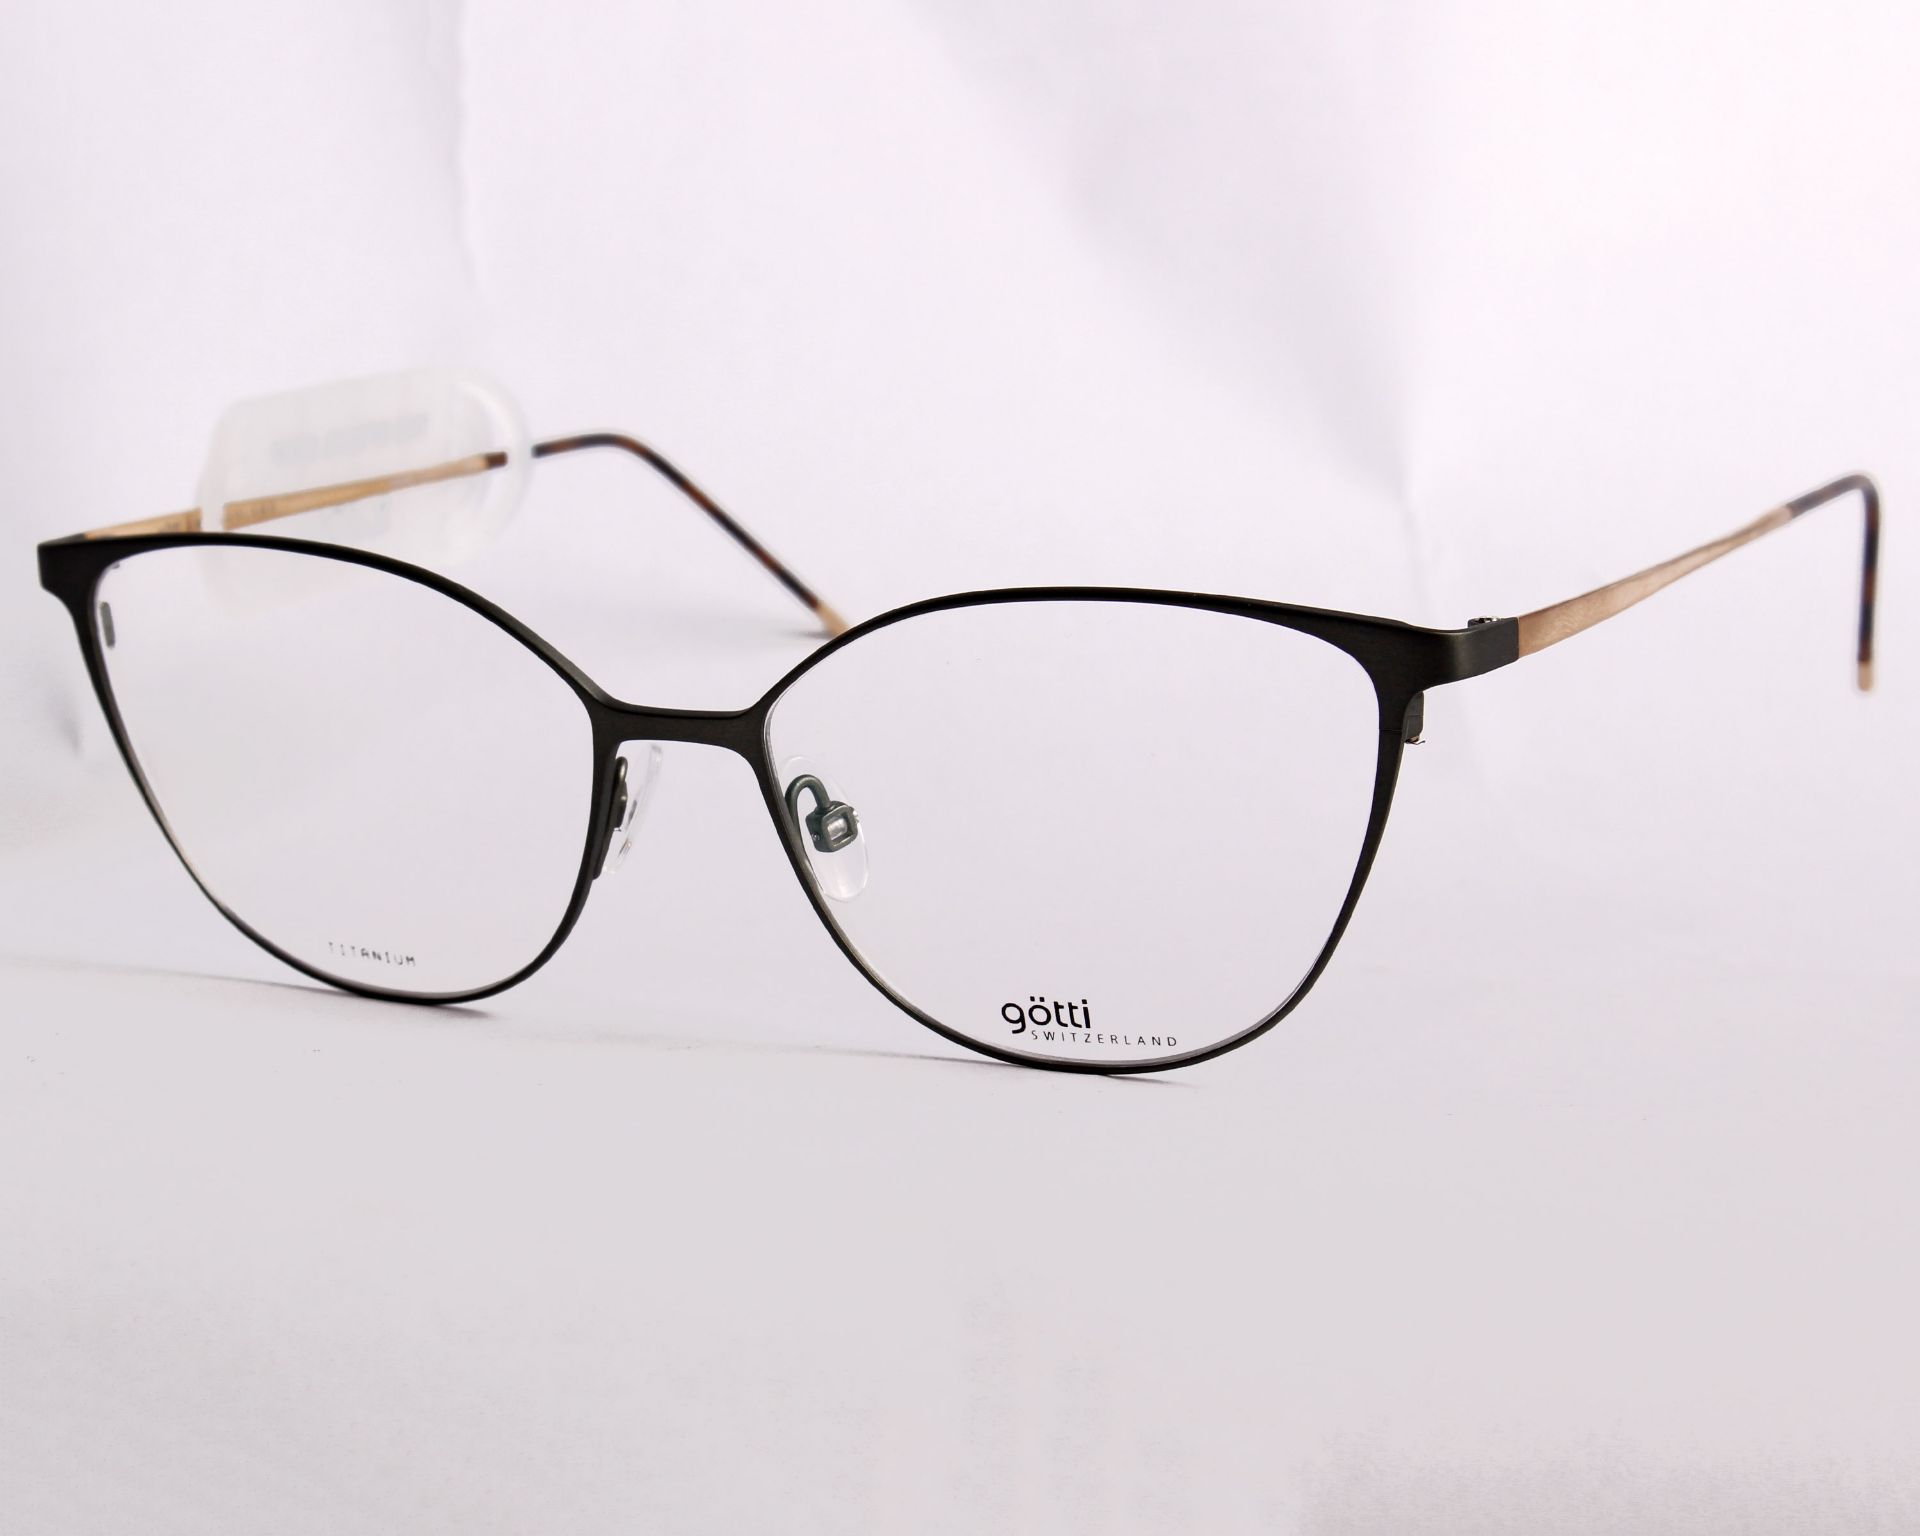 A pair of as new Gotti glasses frames with clear glass (RRP £350). - Image 2 of 3